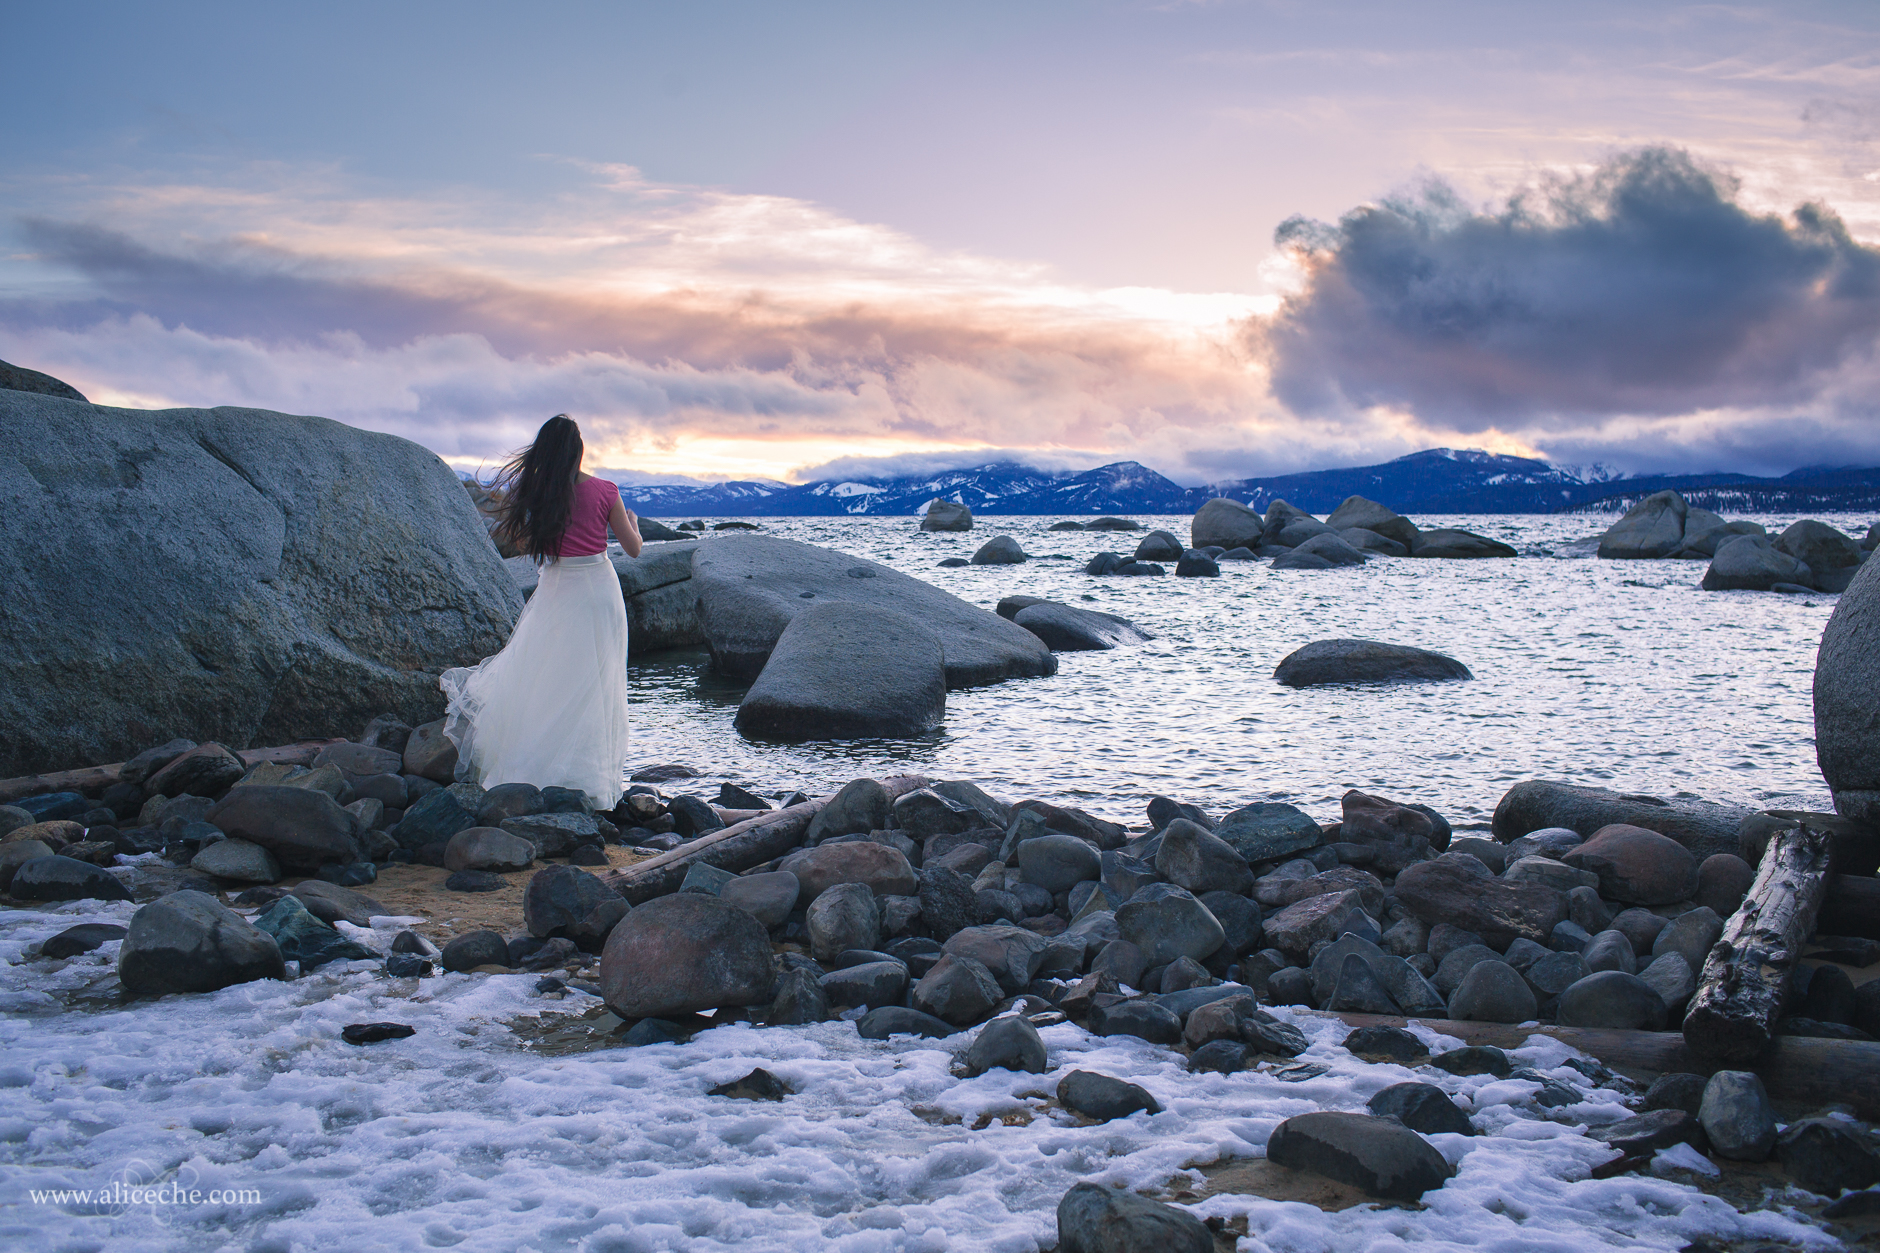 alice-che-photography-lake-tahoe-self-portrait-sunset-tossing-hair-back-tulle-skirt-snow